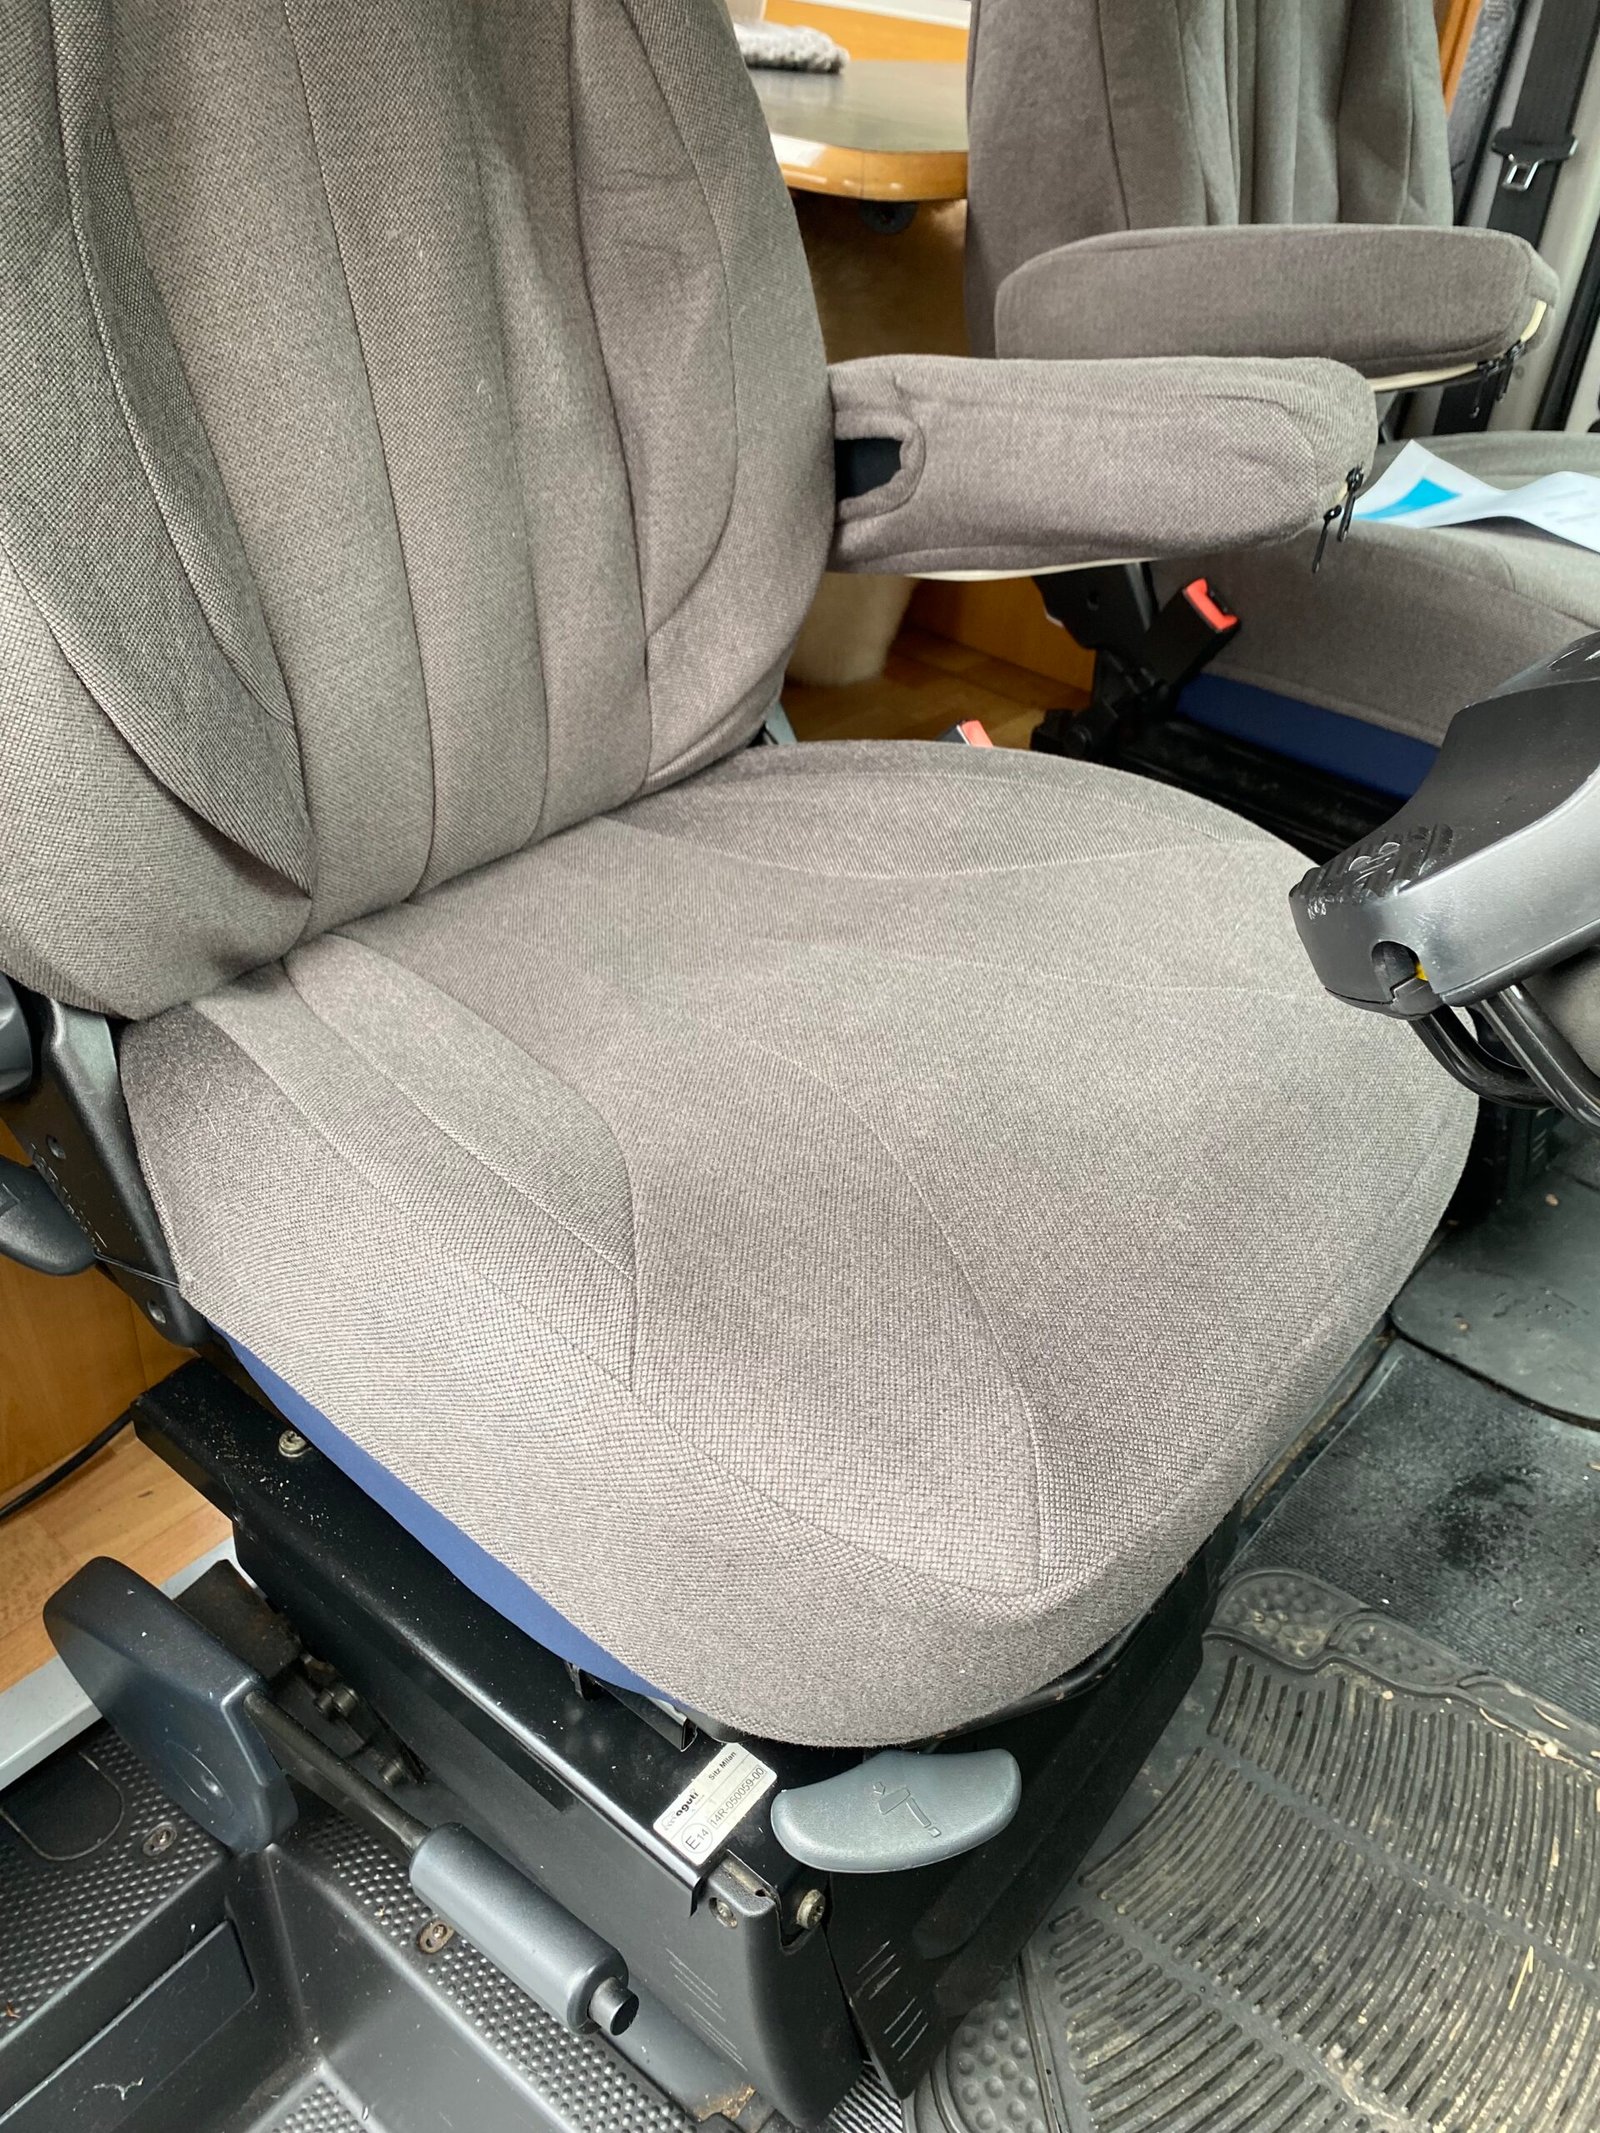 Fiat Ducato motorhome seat covers - Serenity N3 - MilesOfSmilesSeatCovers